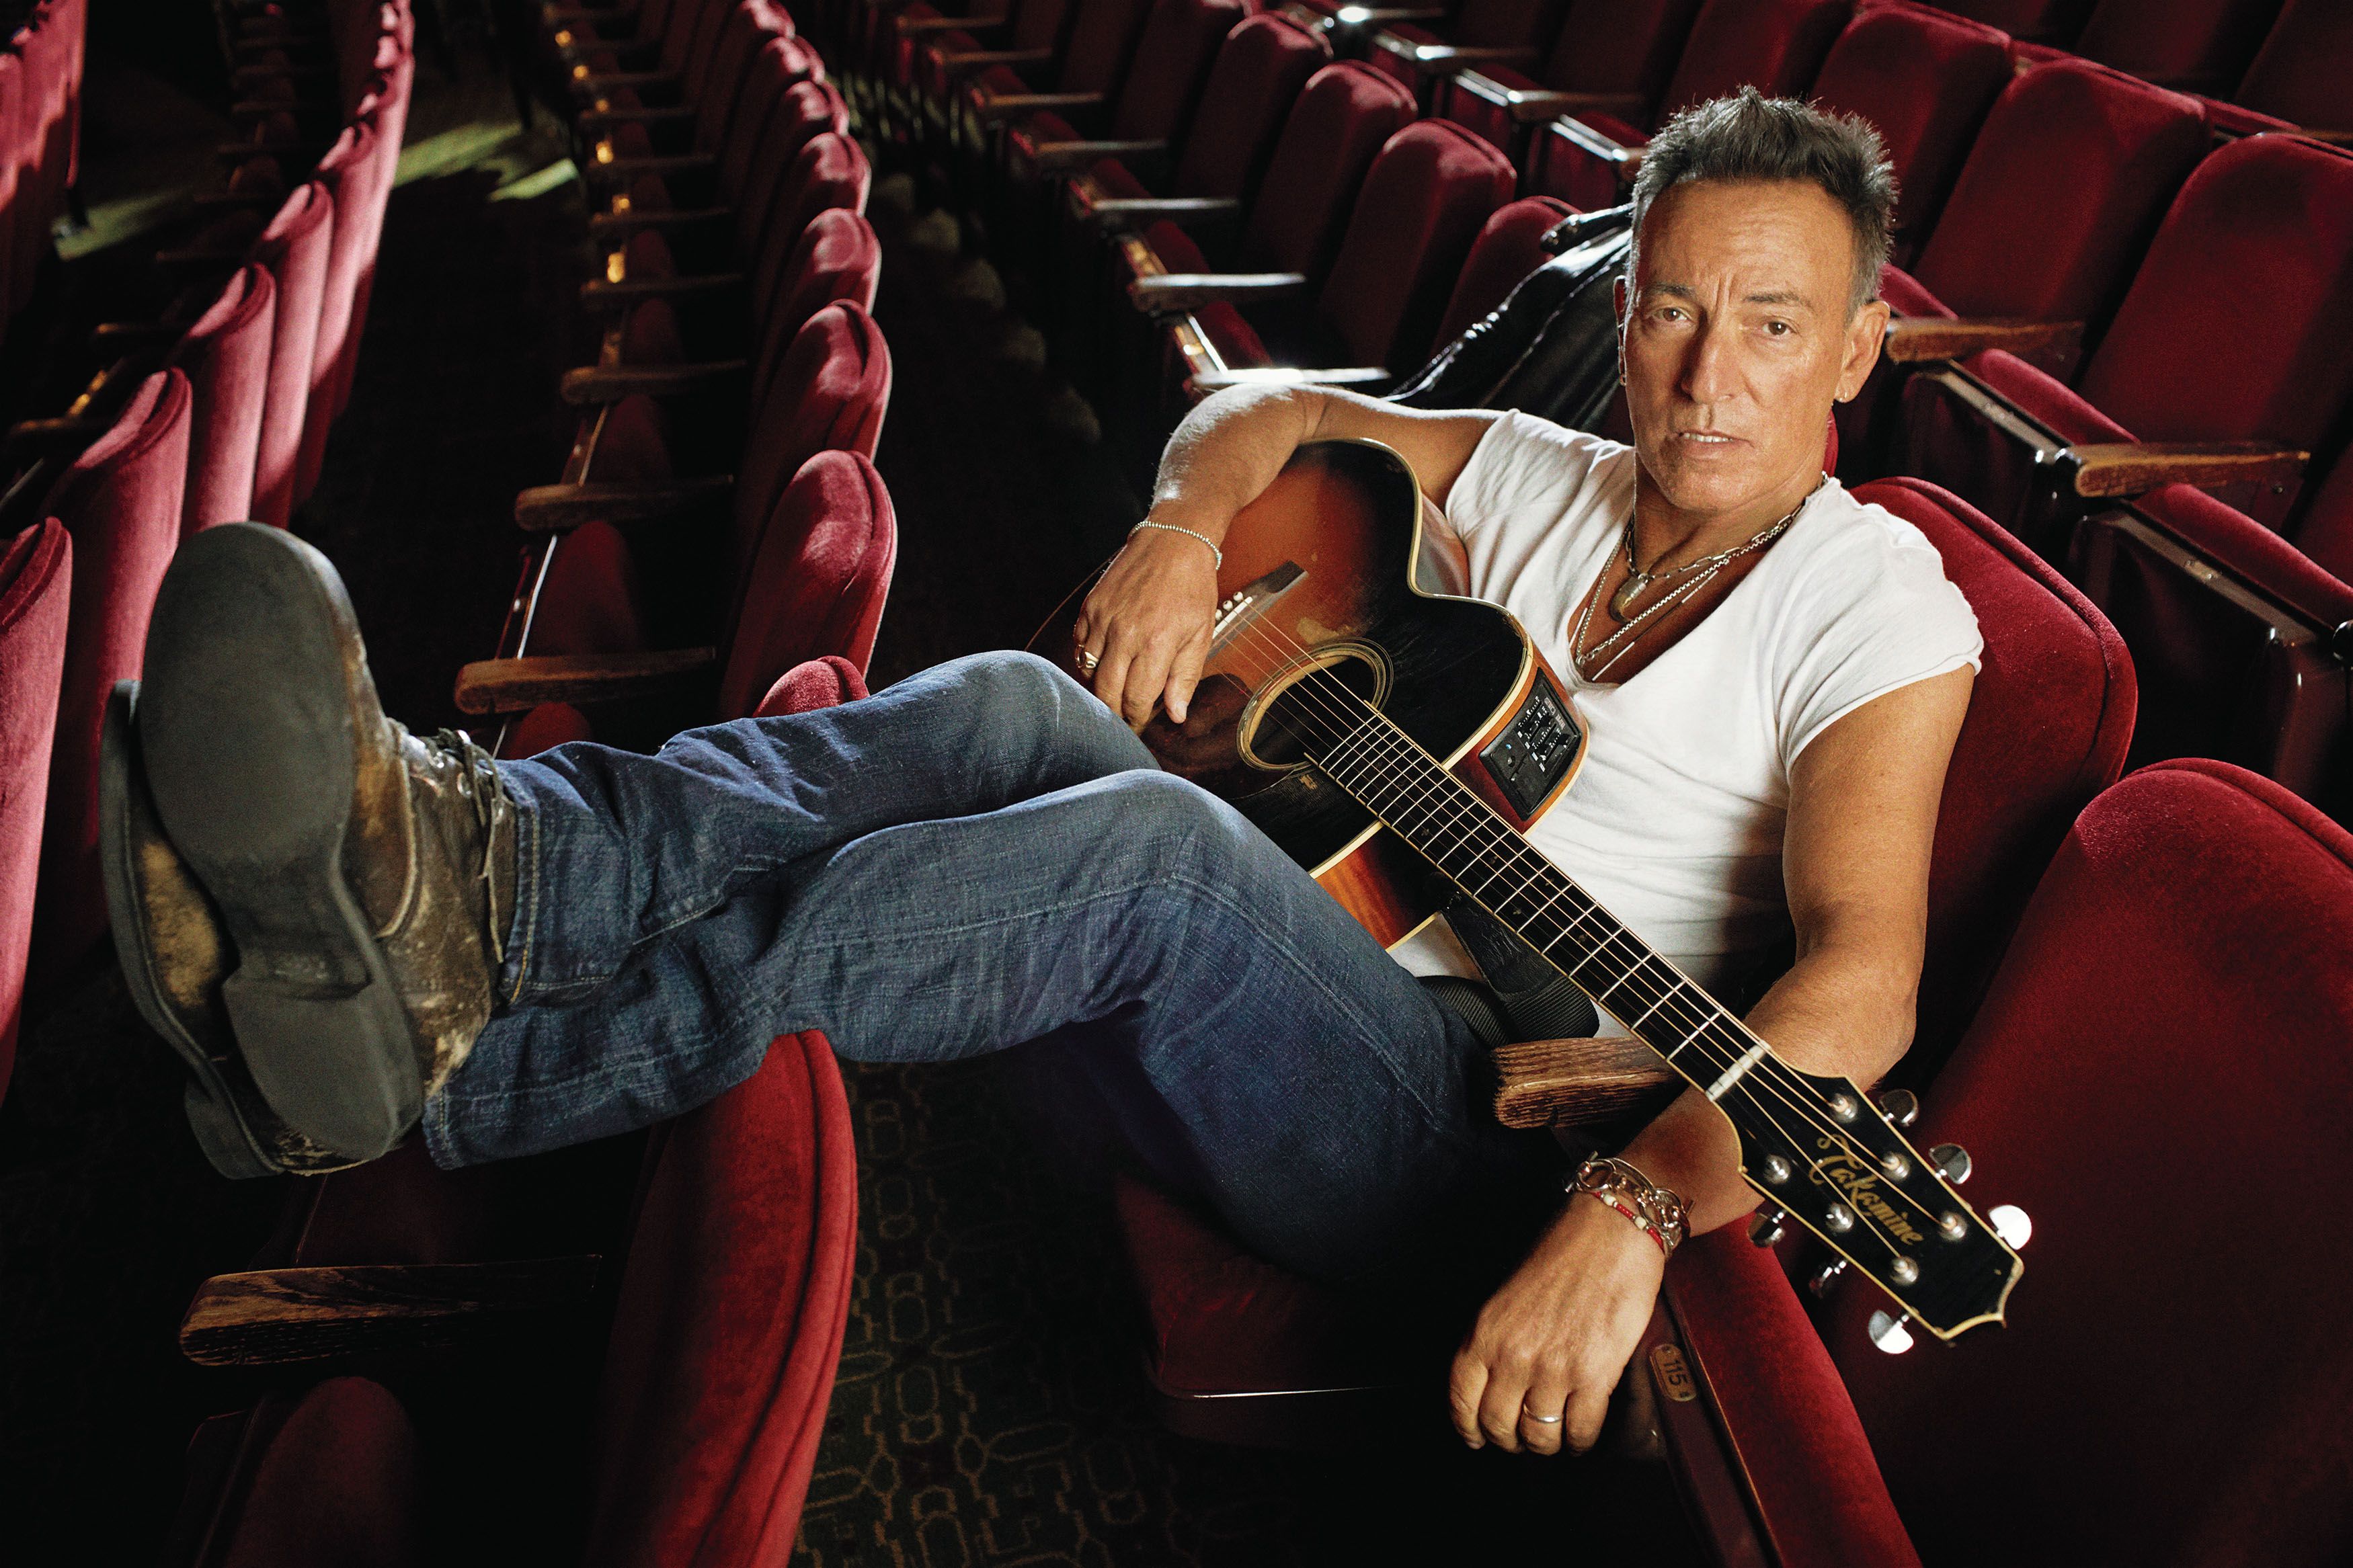 Bruce Springsteen on Mental Health, Springsteen on Broadway, His